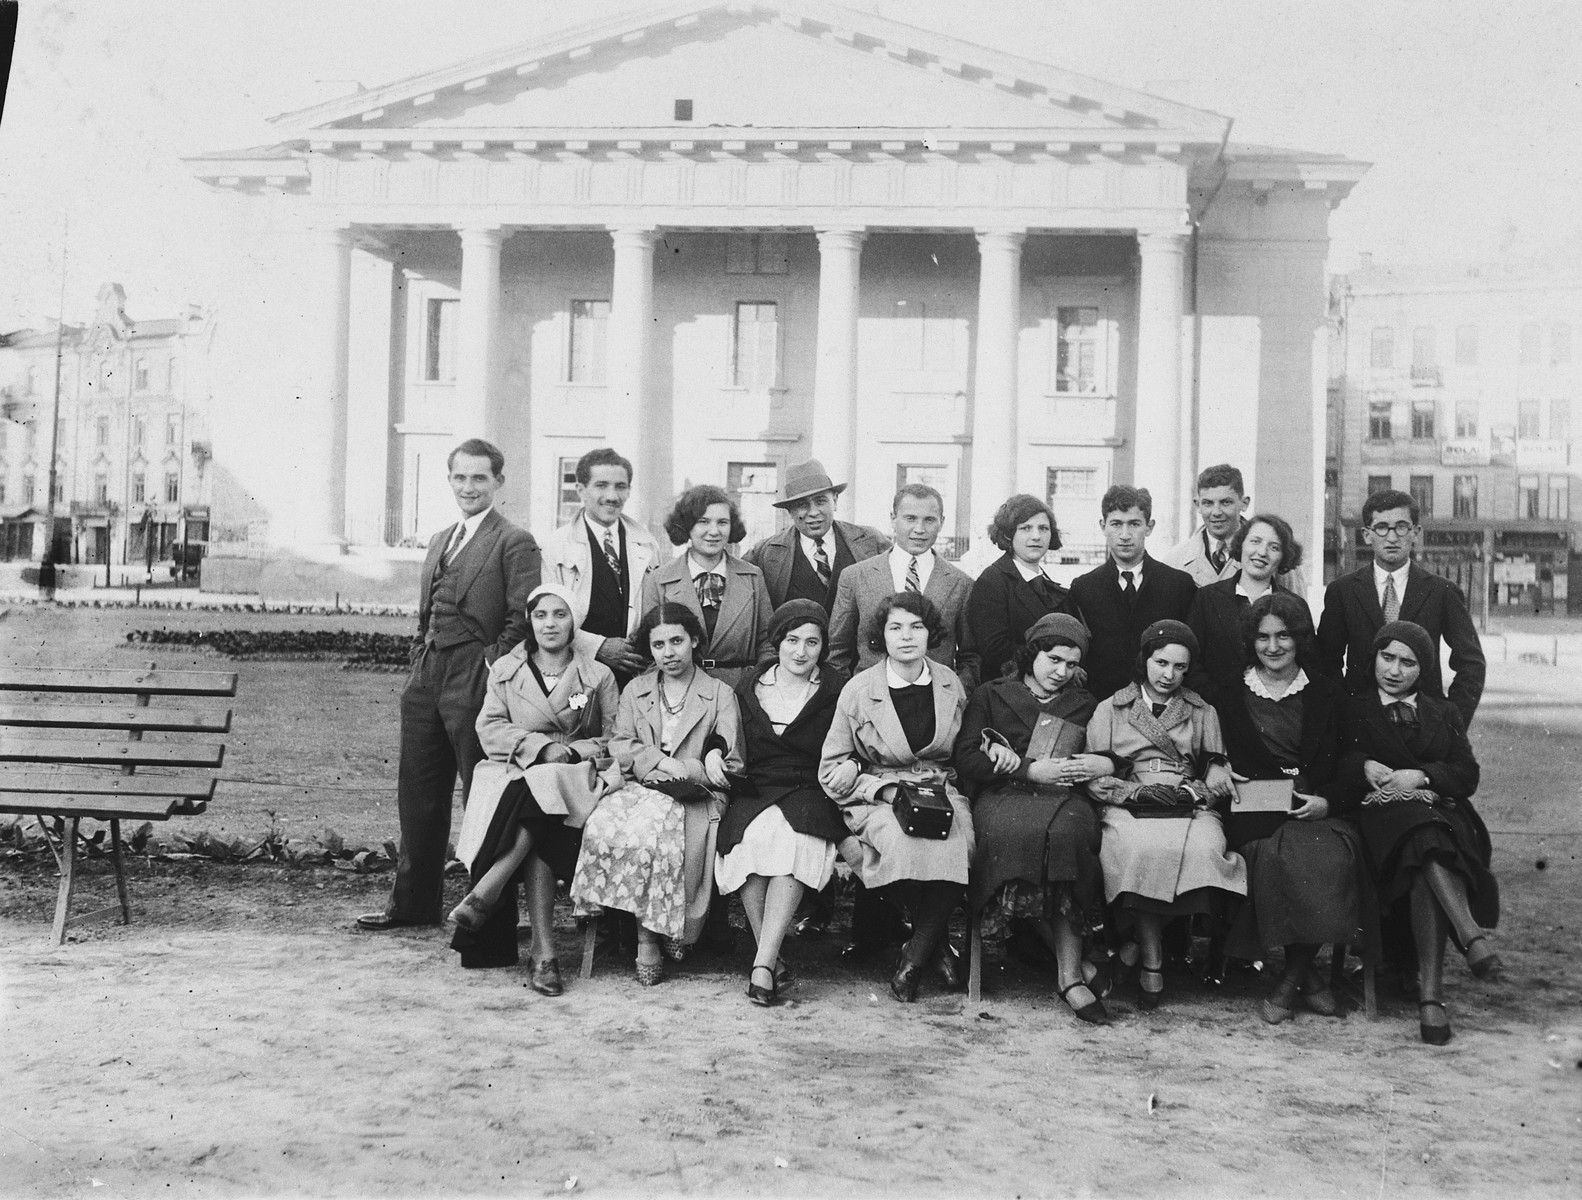 Group portrait of students of the Yiddish gymnasium in Vilna.

Among those pictured is Emma Puzarisky (front row, third from the right).